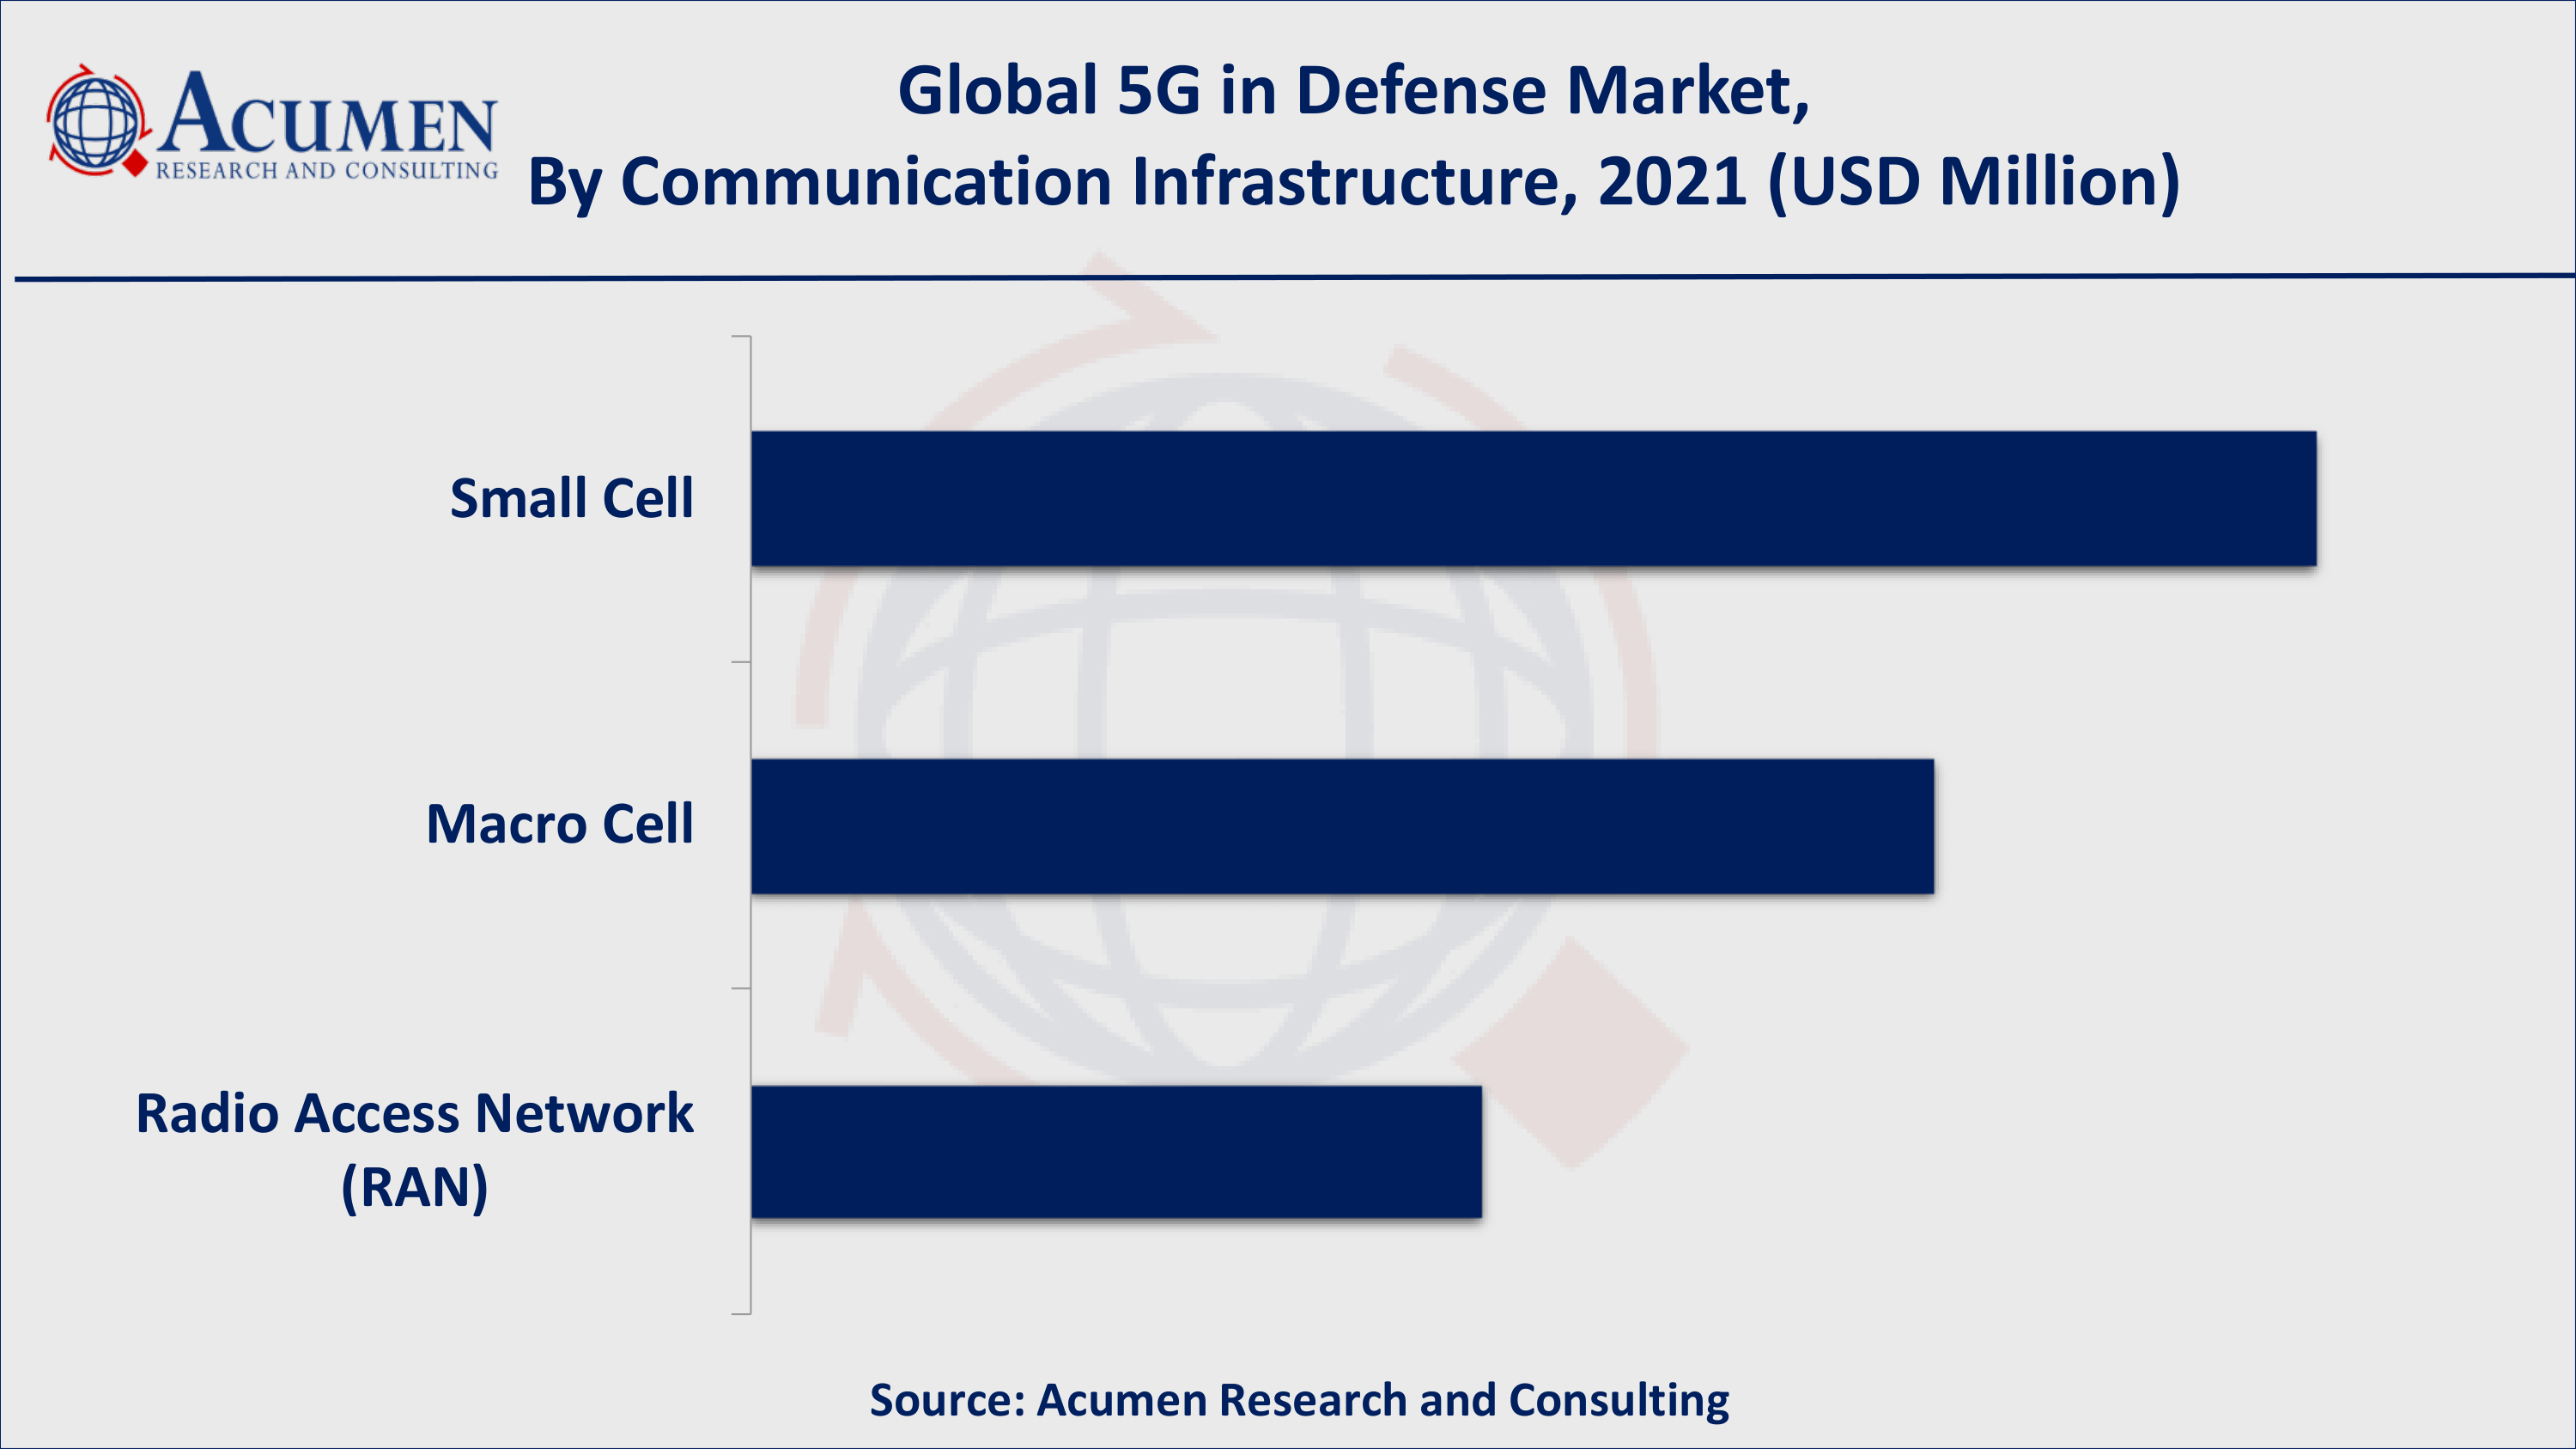 Based on communication infrastructure, small cell gathered over 45% of the overall market share in 2021